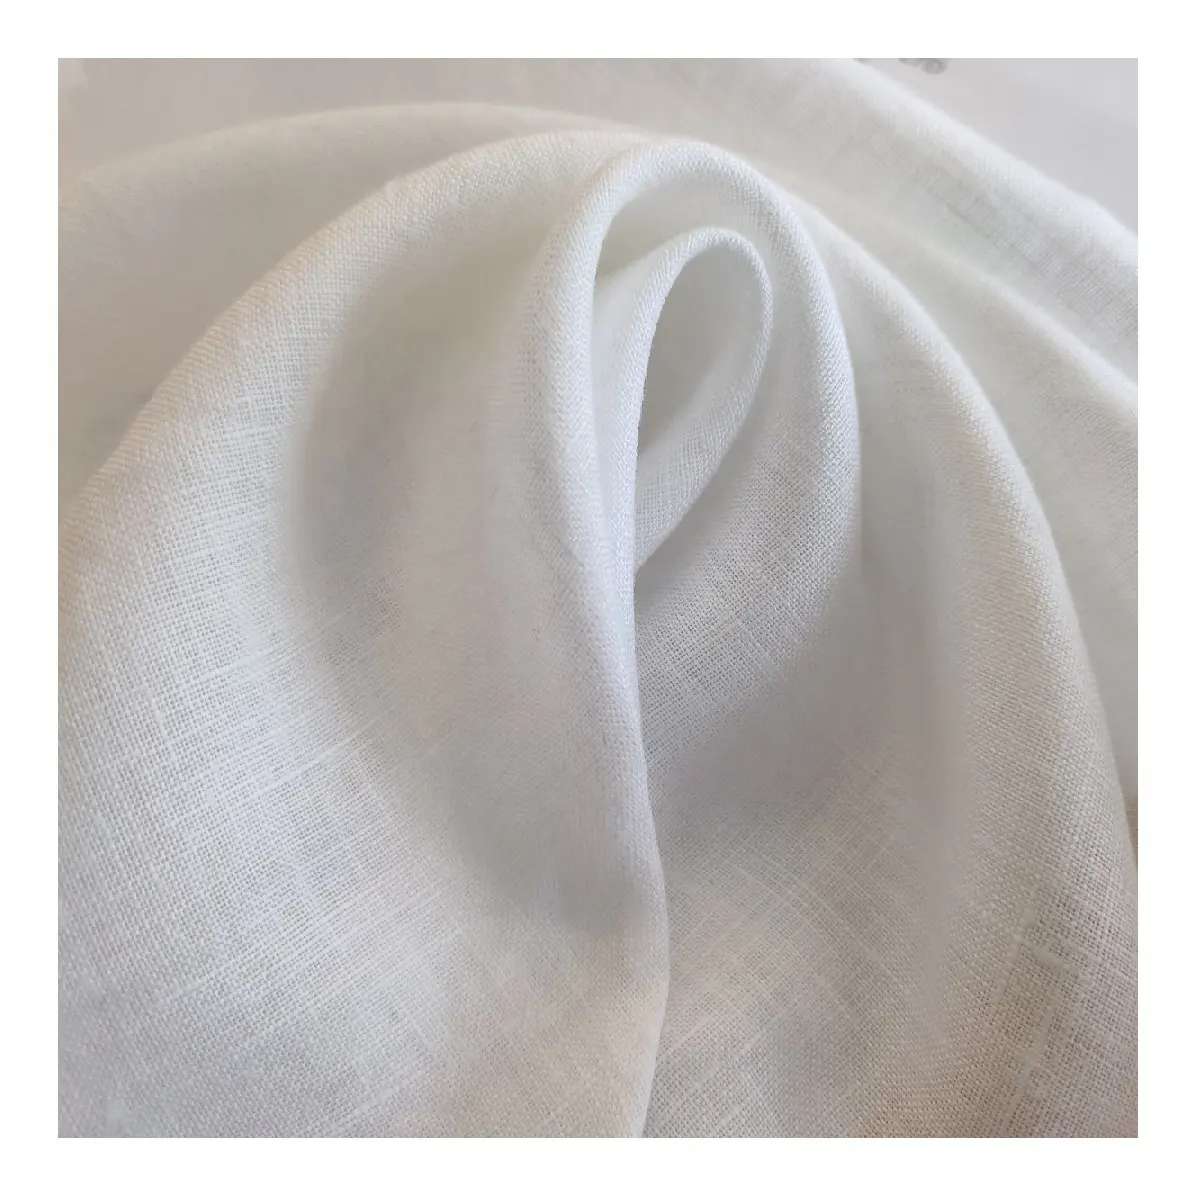 Fabric European Soft White for Shirt and Dress 100% Linen Clothes Hot Sale 100% Linen 100% Natural French